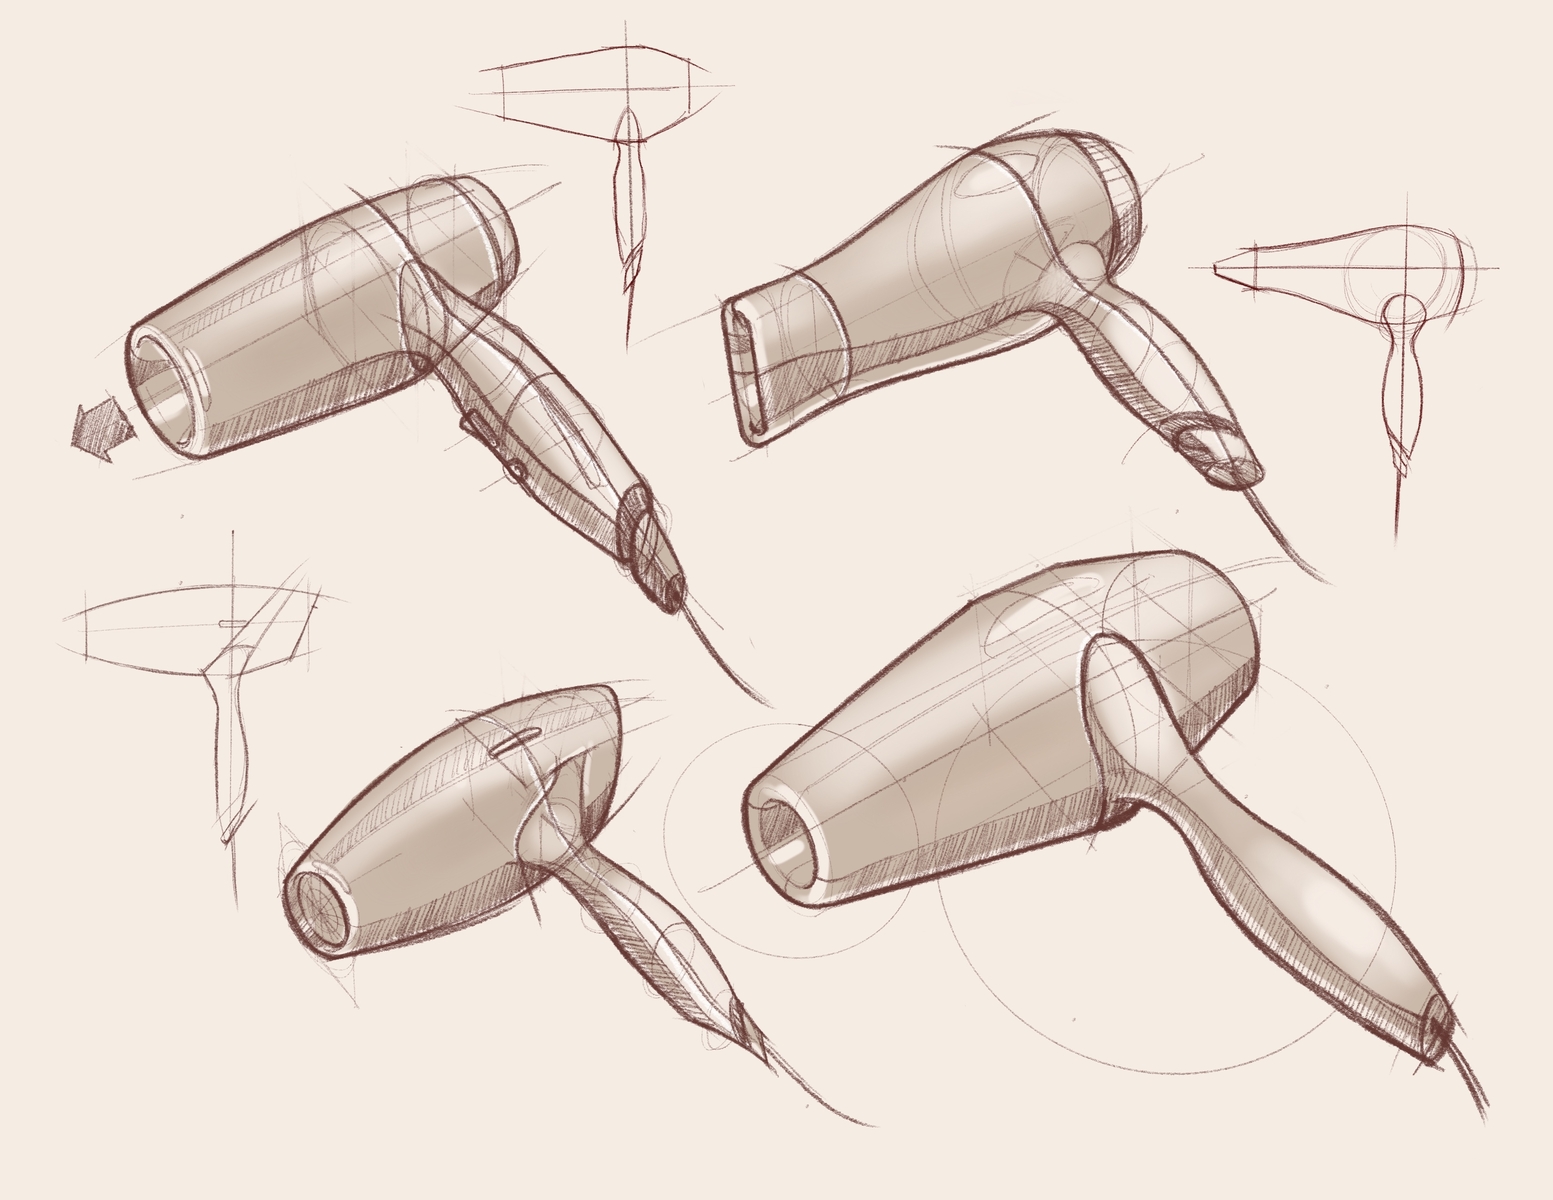 Hair dryer concept sketch by Laura Ott on Dribbble